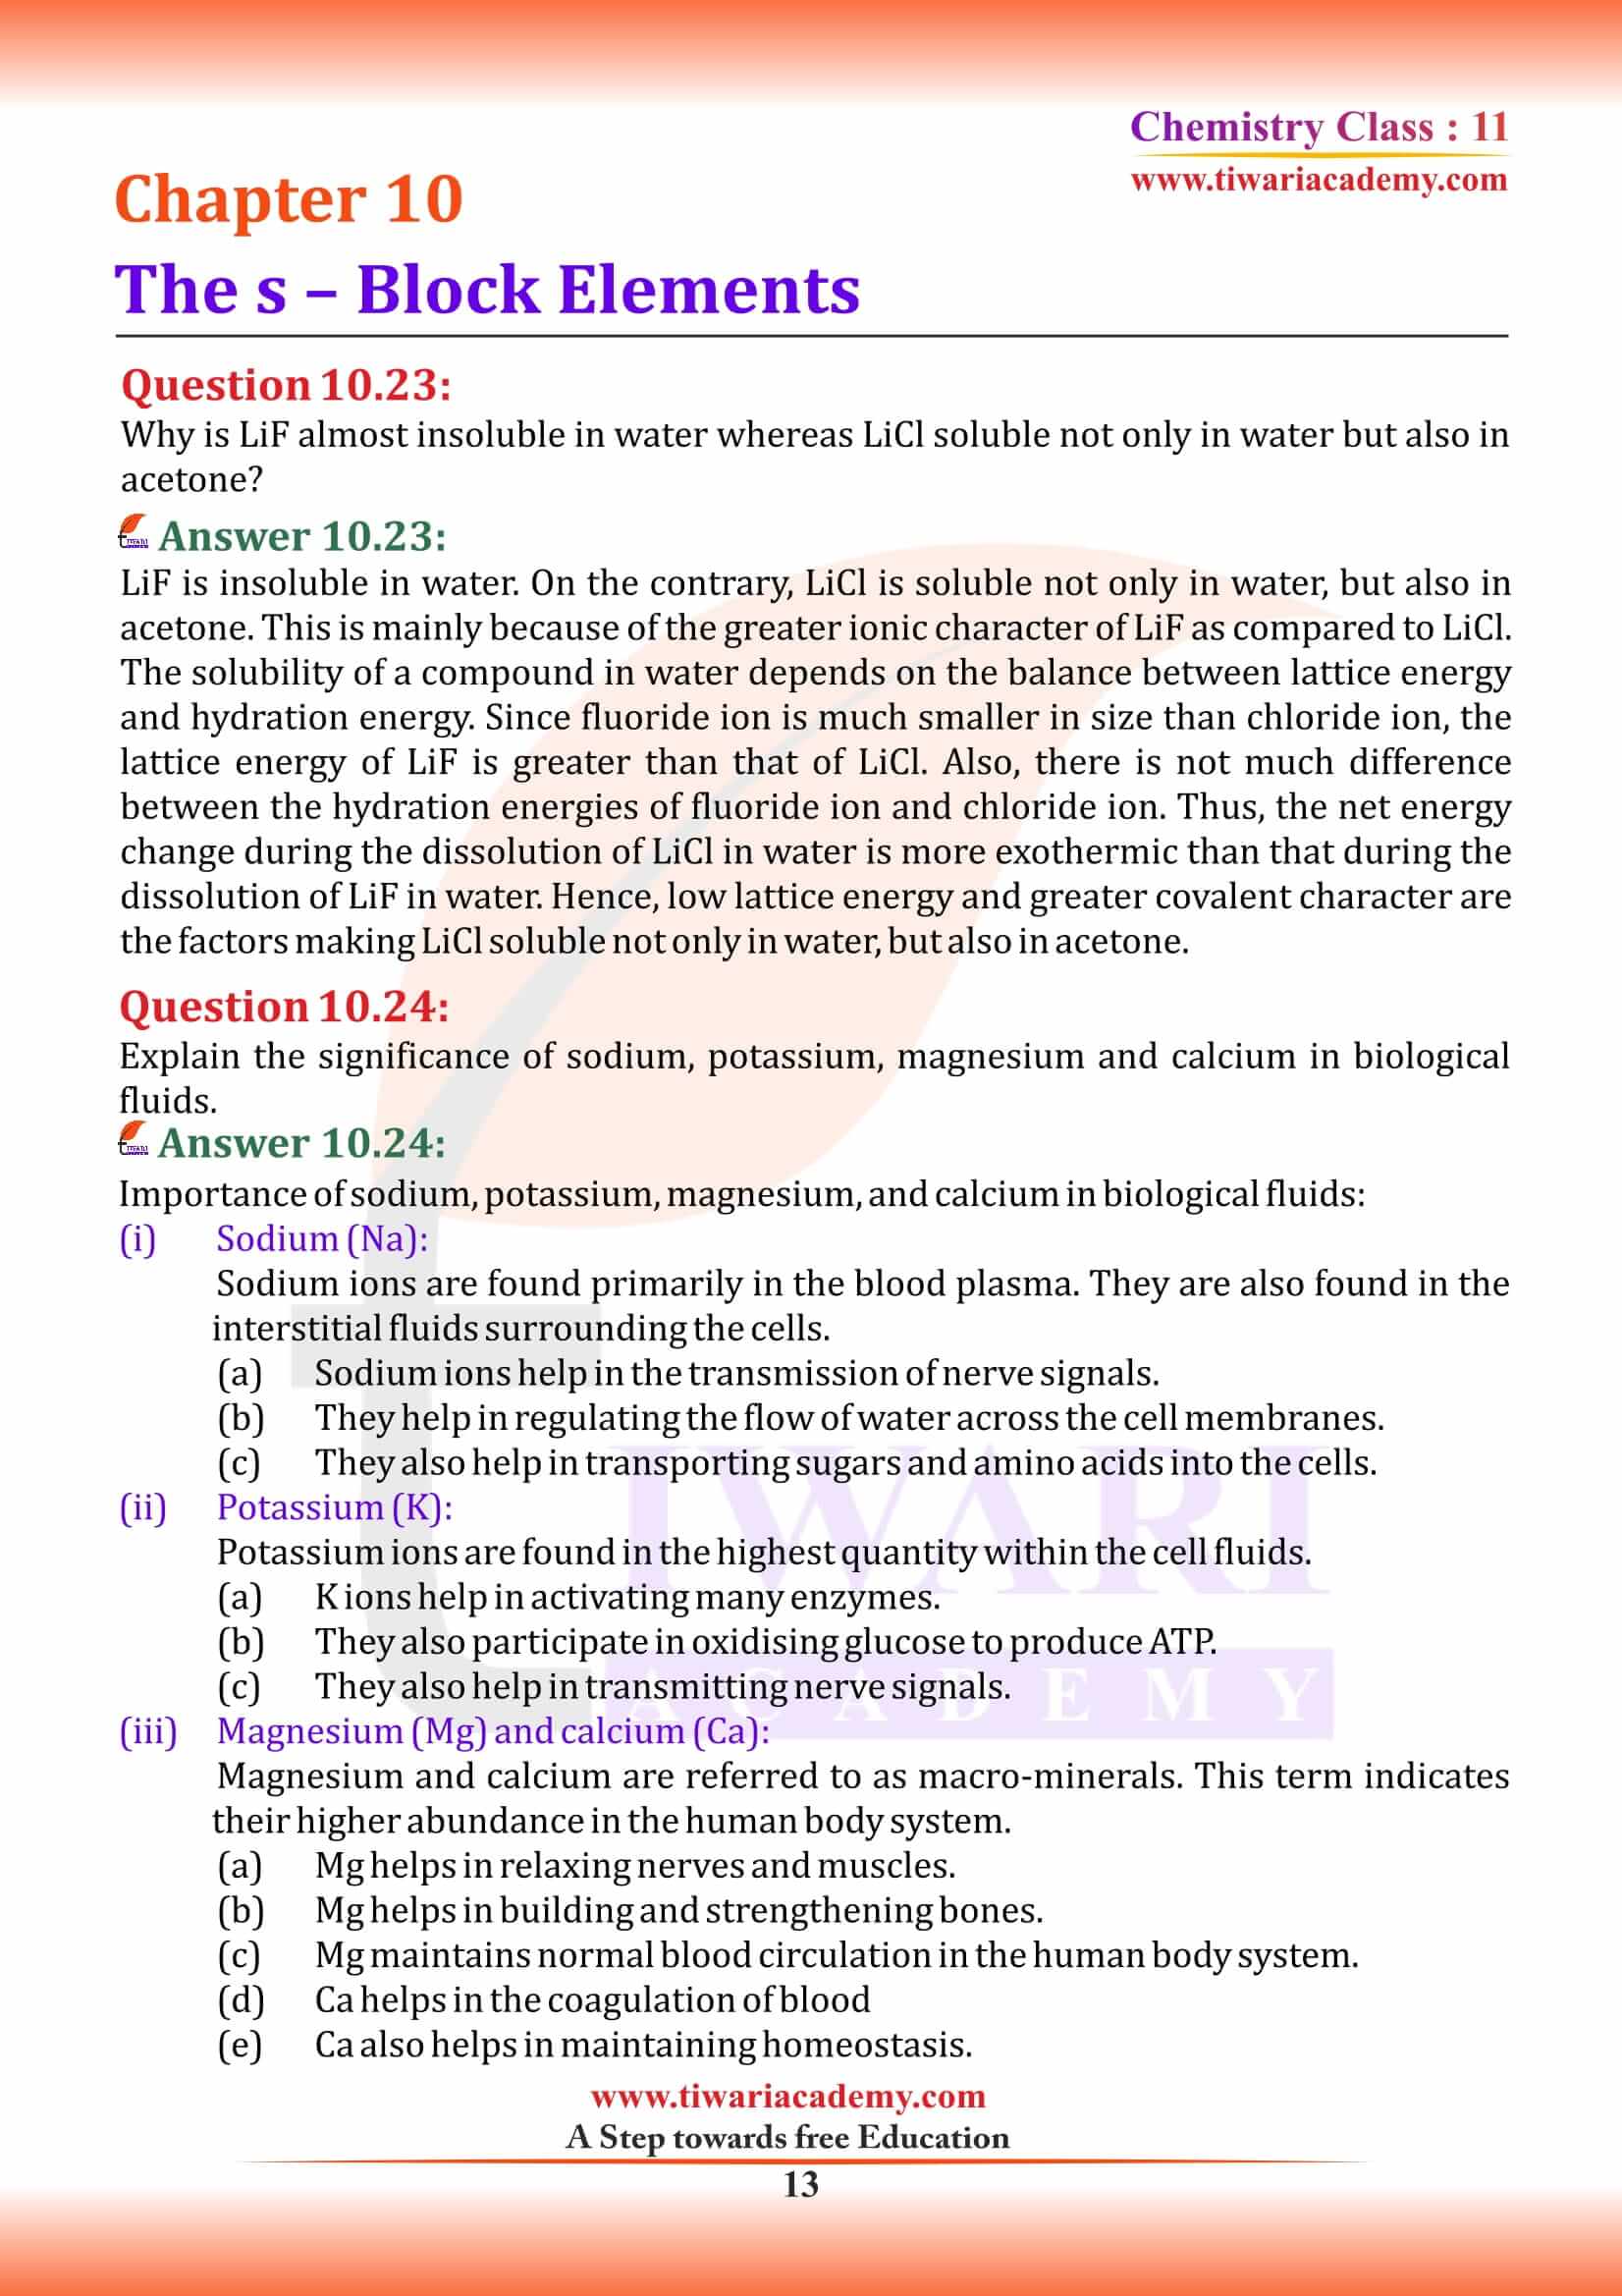 NCERT Solutions for Class 11 Chemistry Chapter 10